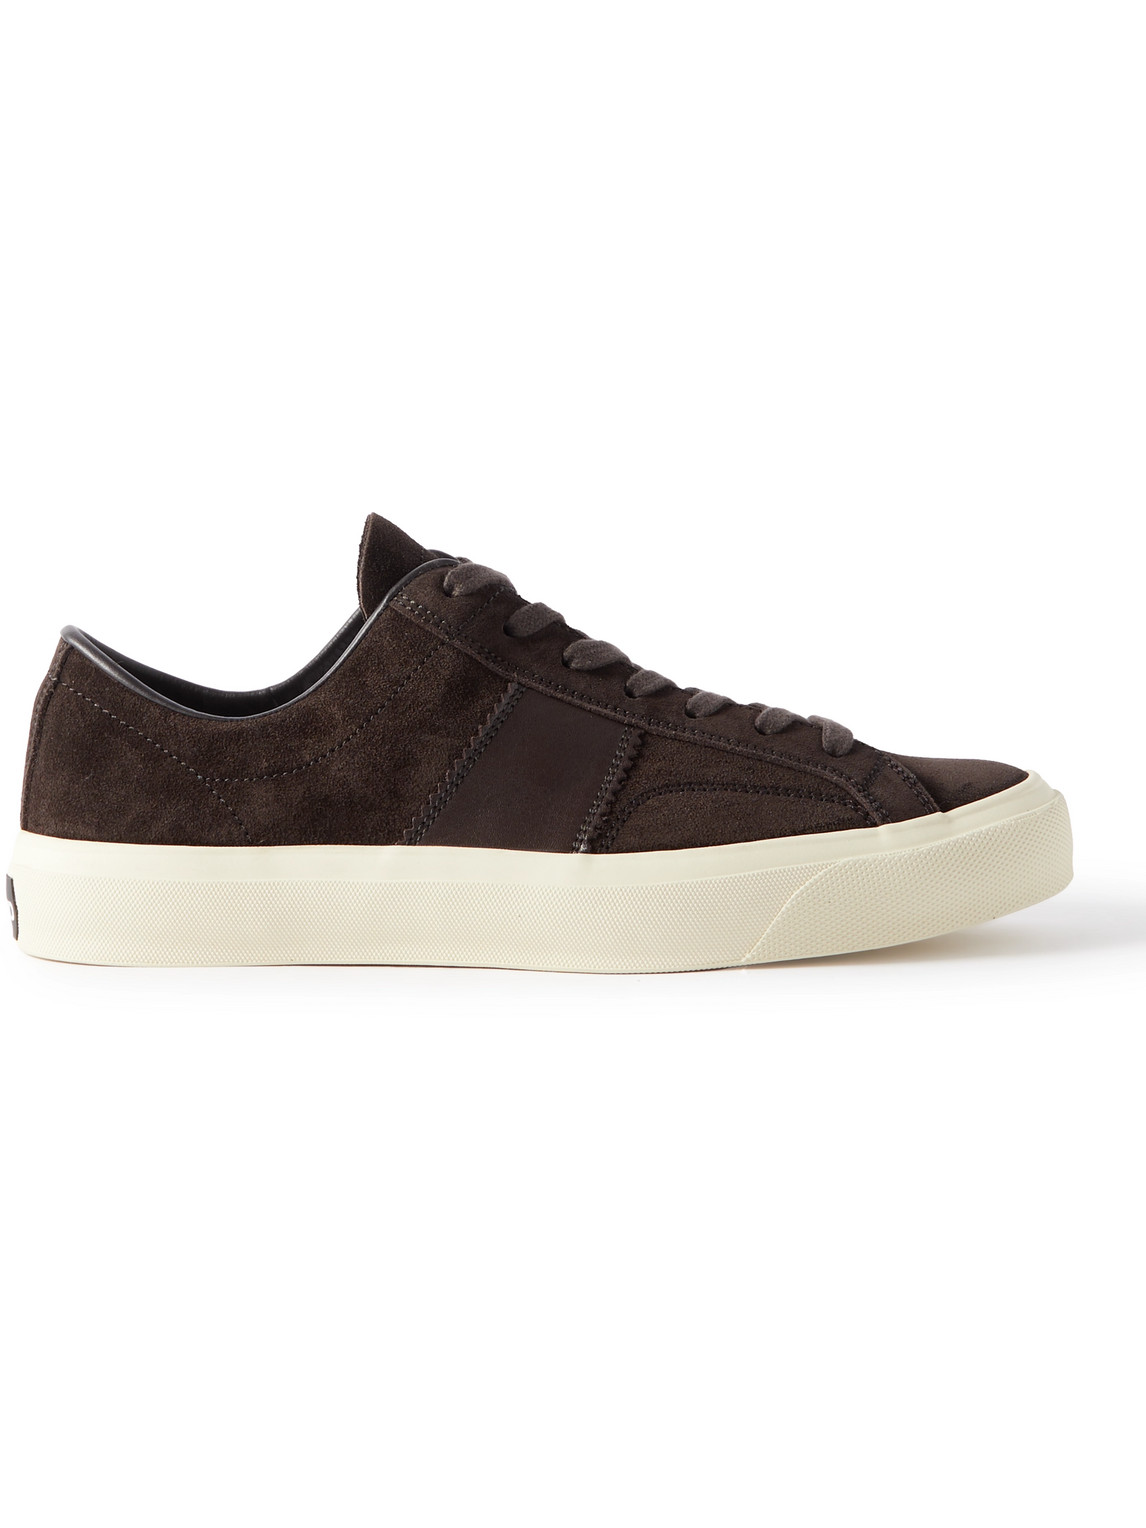 TOM FORD - Cambridge Leather-Trimmed Suede Sneakers - Men - Brown - UK 7 von TOM FORD